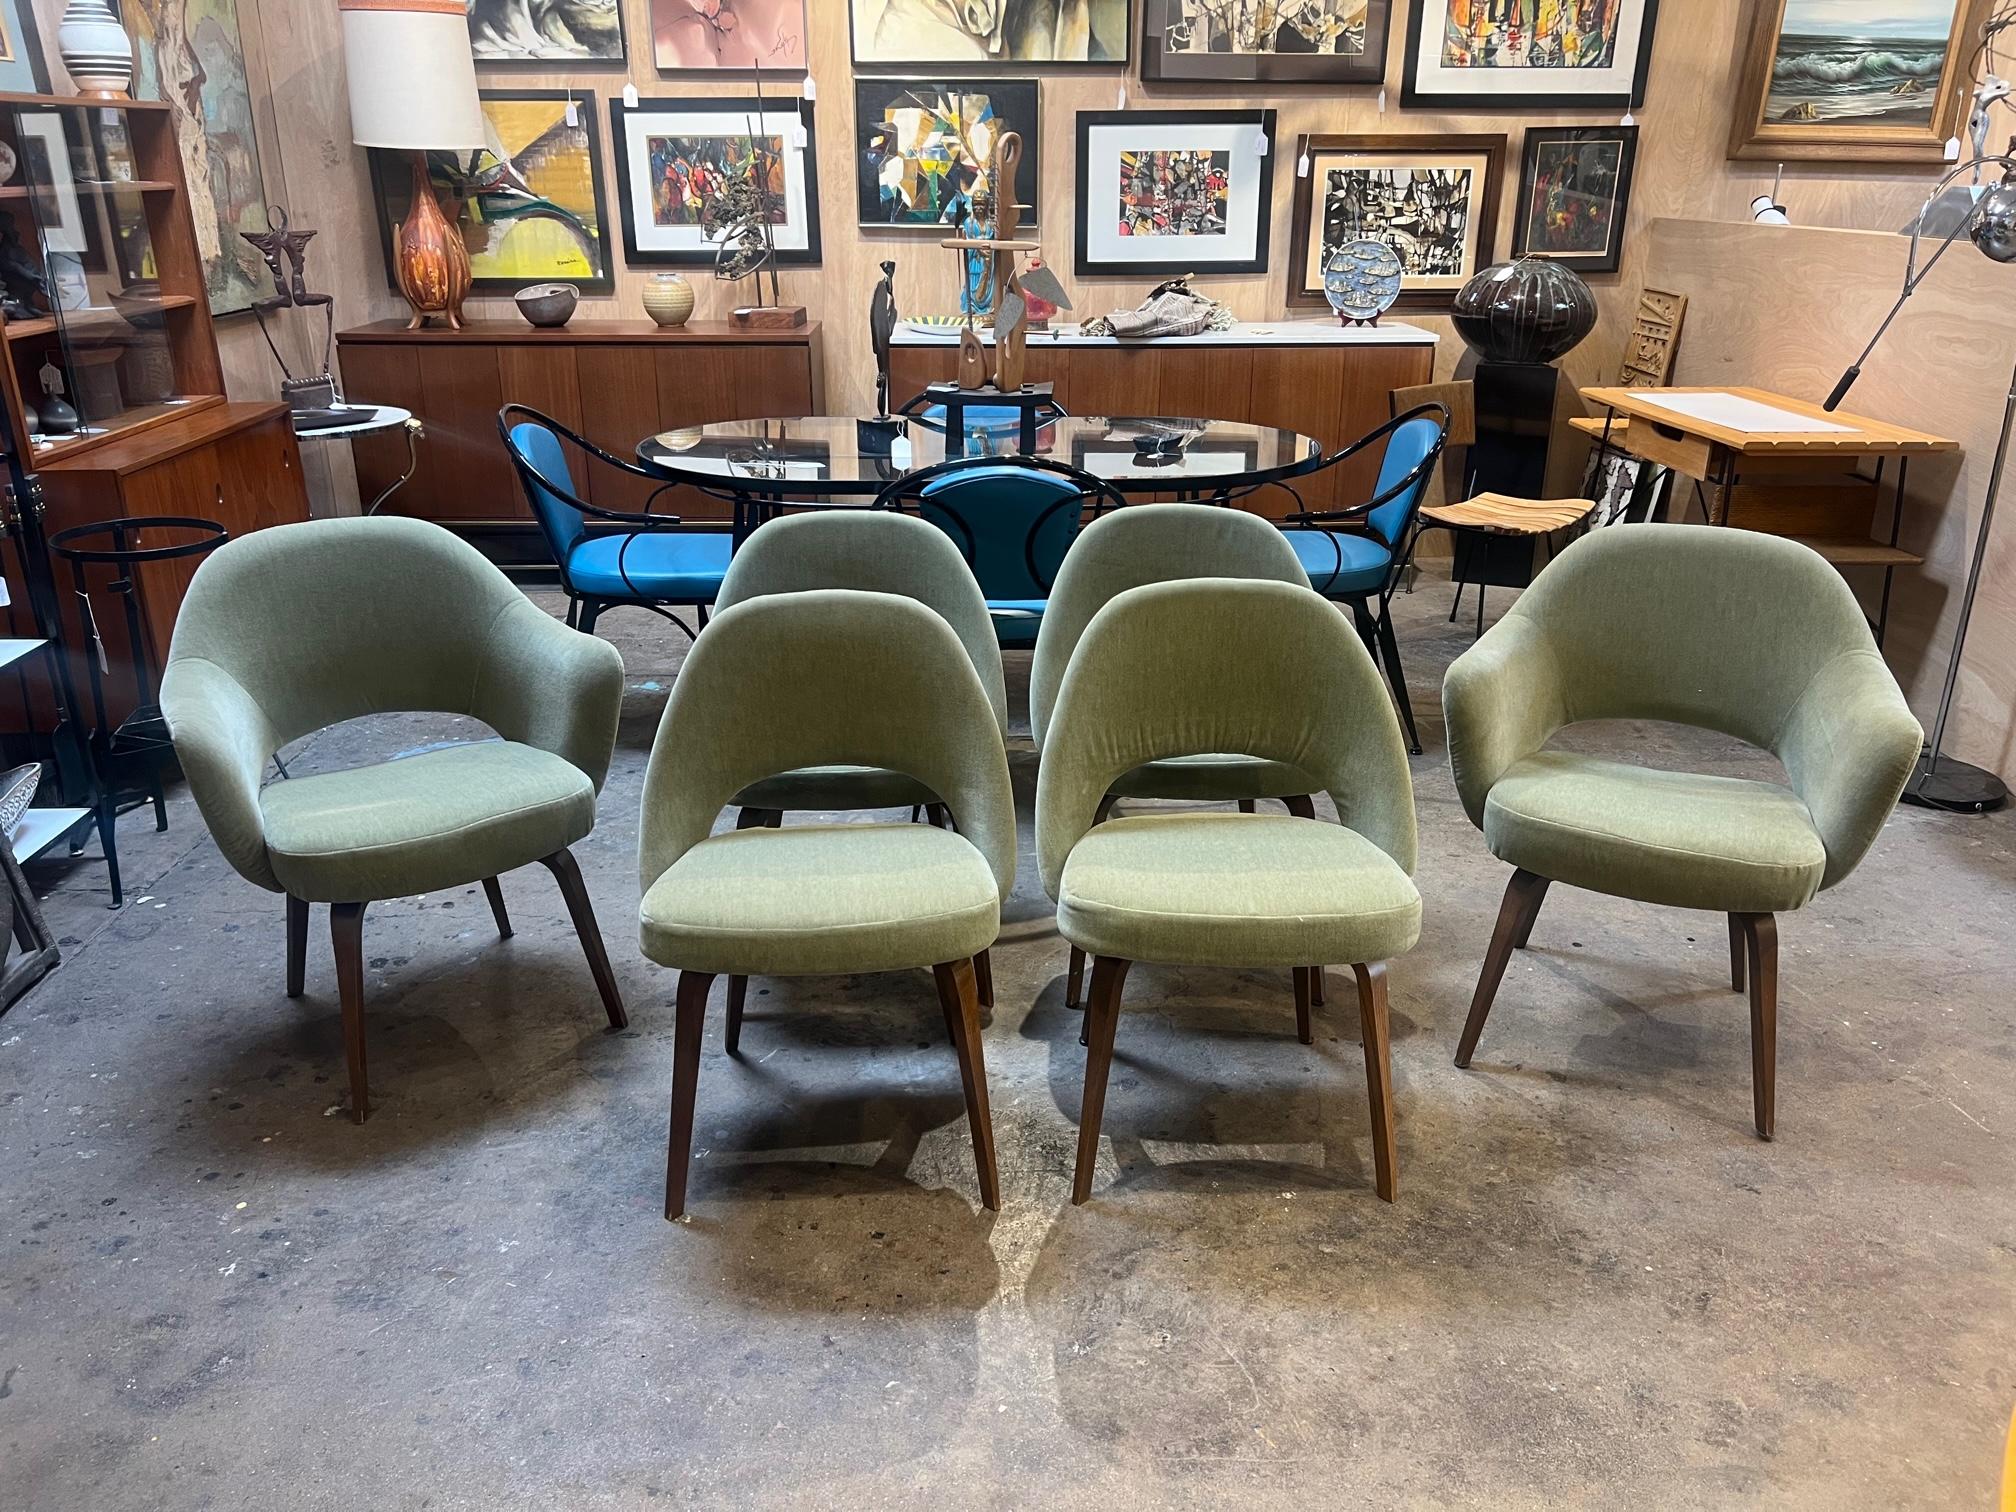 Designed by Eero Saarinen a beautiful set of chairs - Two Executive Arm Chairs and 4 wooden leg side chairs, with a molded reinforced polyurethane shell. Newly Re-upholstered in a luxe Velvet fabric and bent walnut wooden legs. These chairs are sure